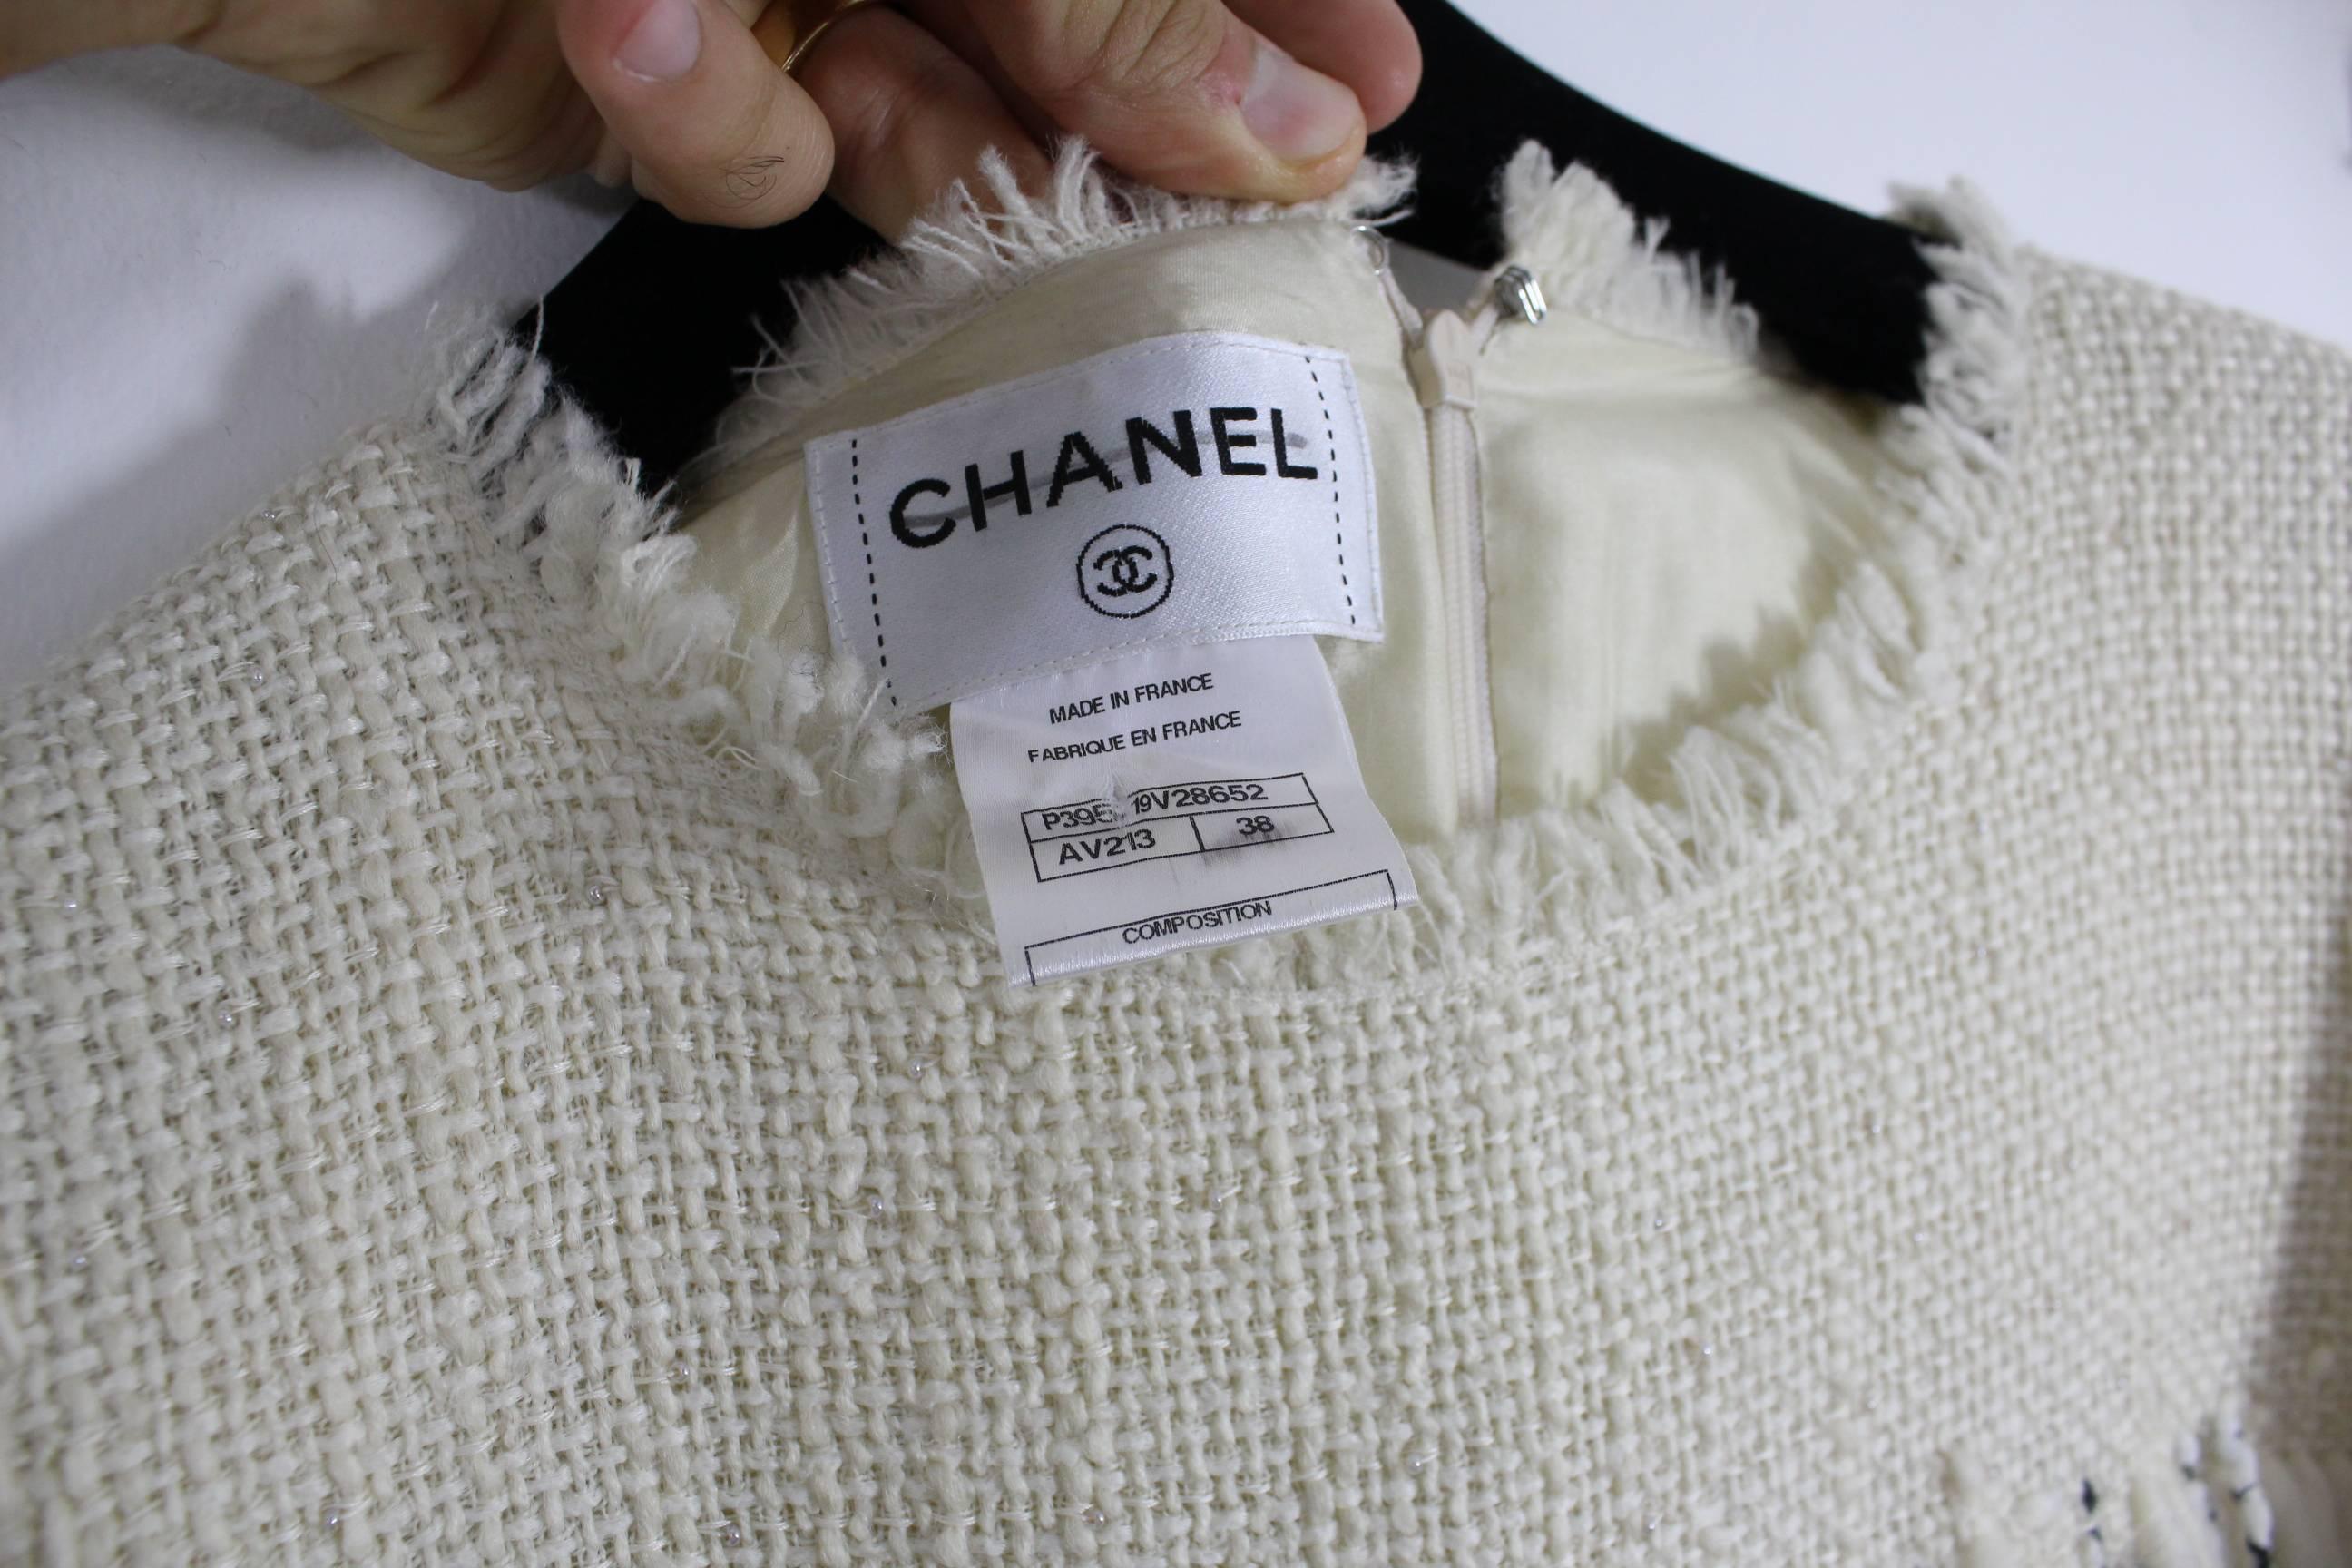 really ncie Winter dress from chanel in white wool and fringes.

Fabric is amazing with some beads in the fabric (see zoom photo)

Size french 38